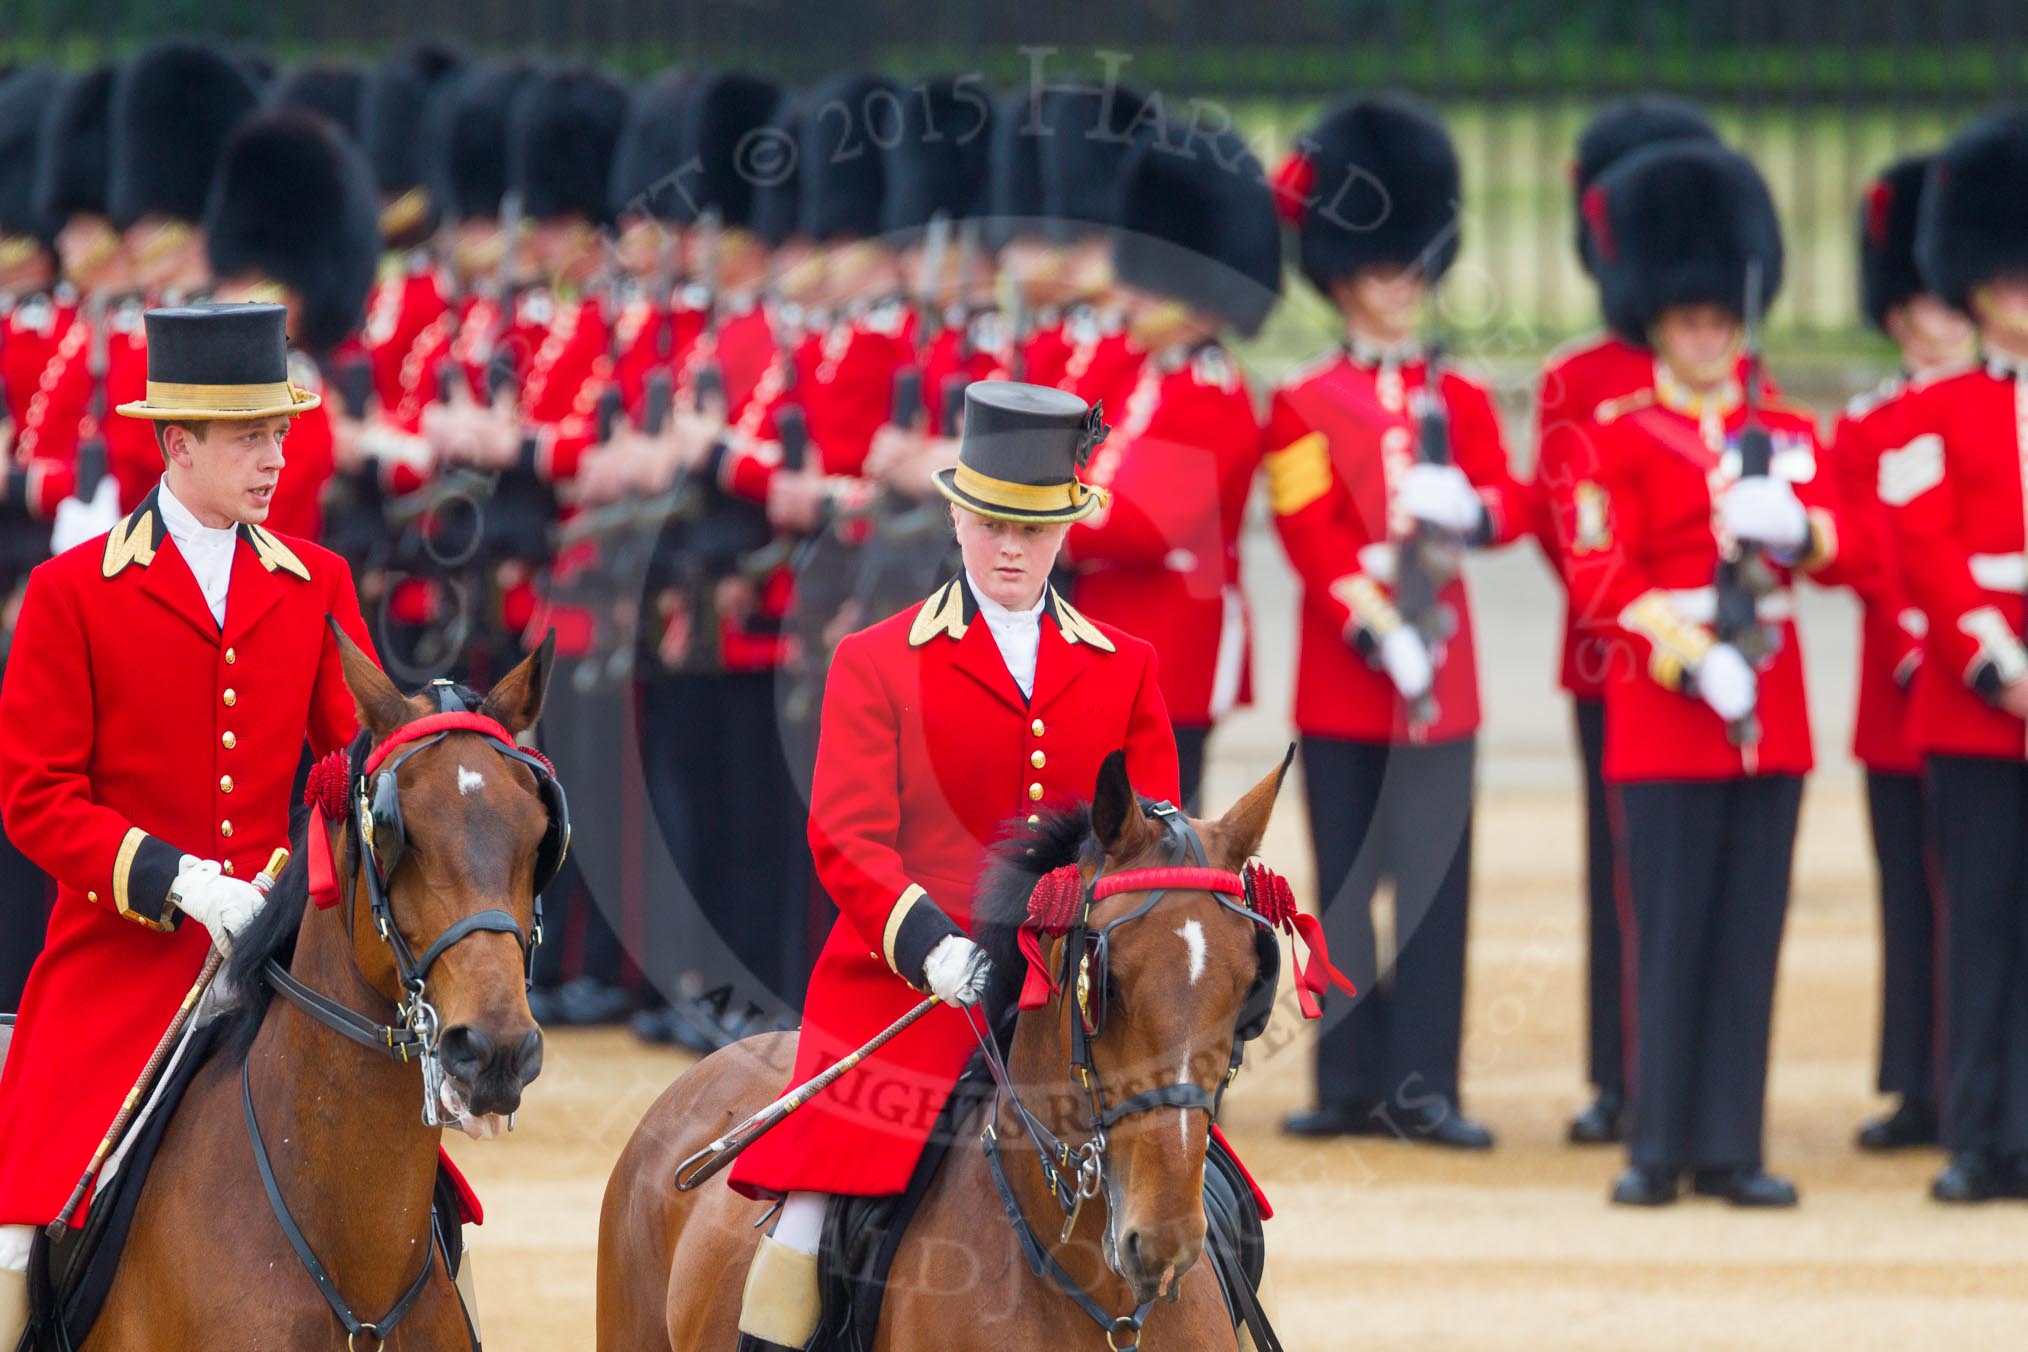 The Colonel's Review 2016.
Horse Guards Parade, Westminster,
London,

United Kingdom,
on 04 June 2016 at 10:51, image #134